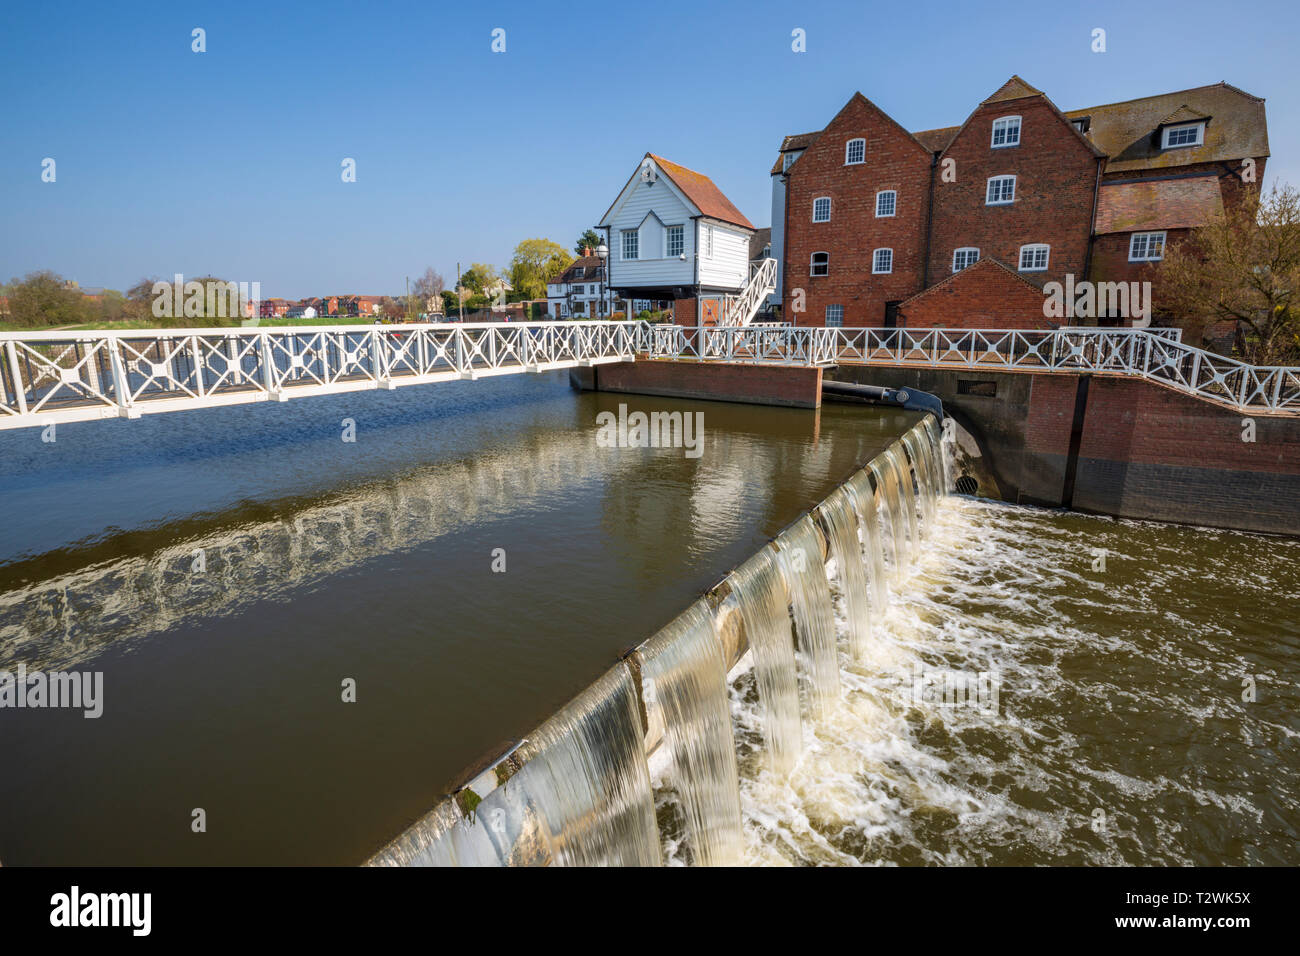 The Abbey Mill at Tewkesbury, Gloucestershire, England Stock Photo